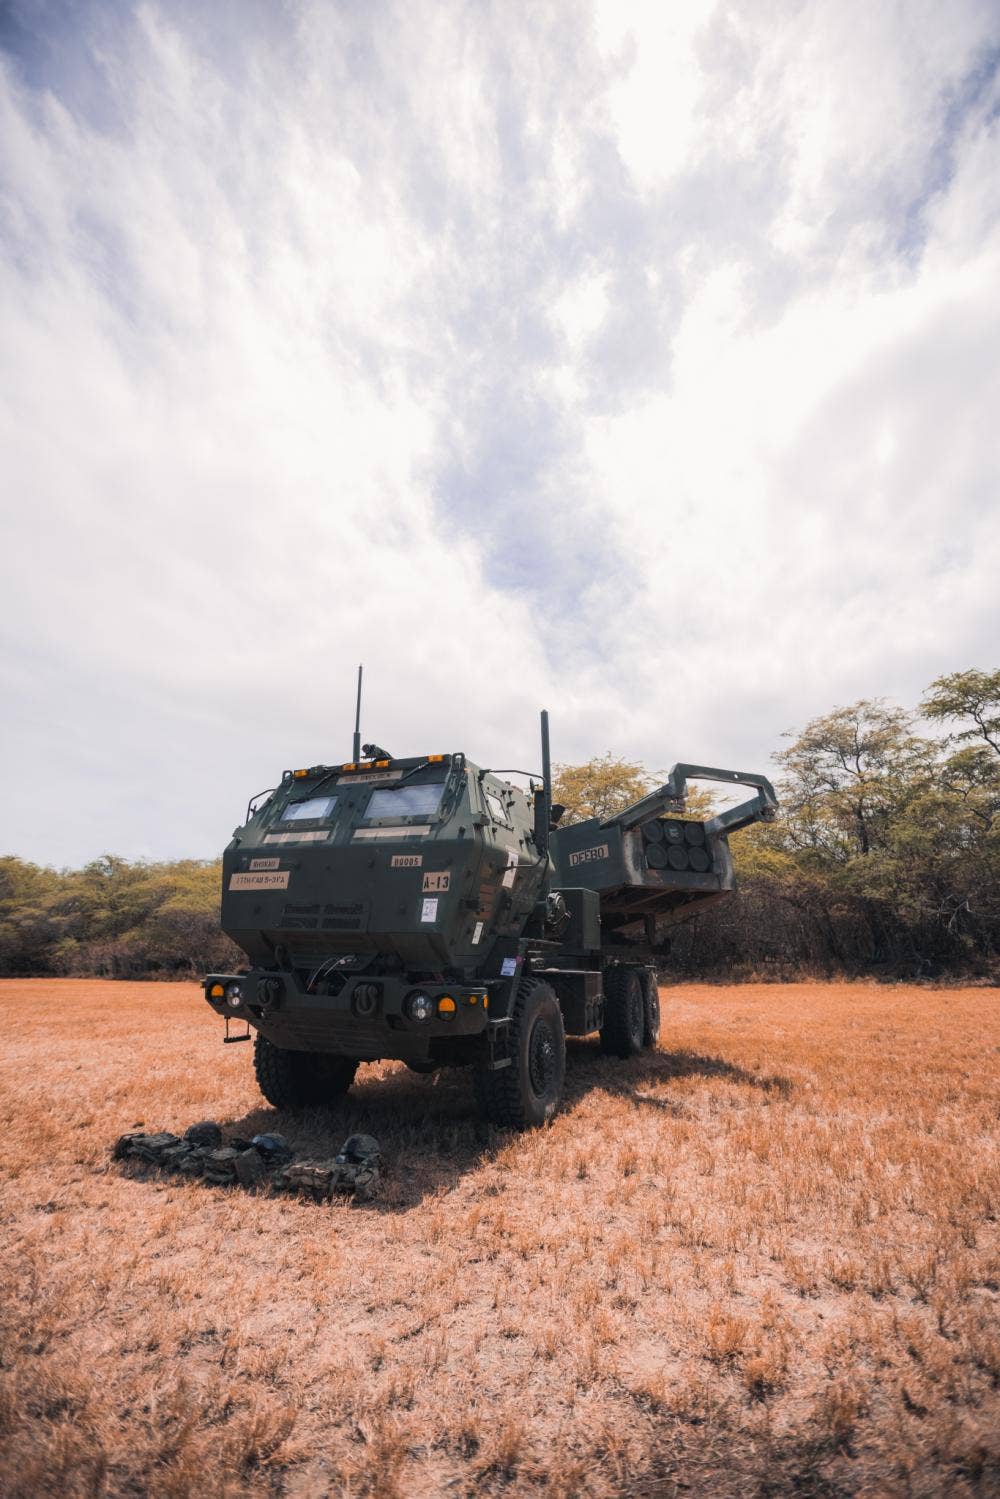 A High Mobility Artillery Rocket System (HIMAR) stands on display in advance of the sinking exercise (SINKEX) during Rim of the Pacific (RIMPAC) 2022. <em>Credit: &nbsp;Lt. Cmdr. Tony Wright/U.S. Army</em><a href="https://www.dvidshub.net/rss/personnel/1149297"></a>